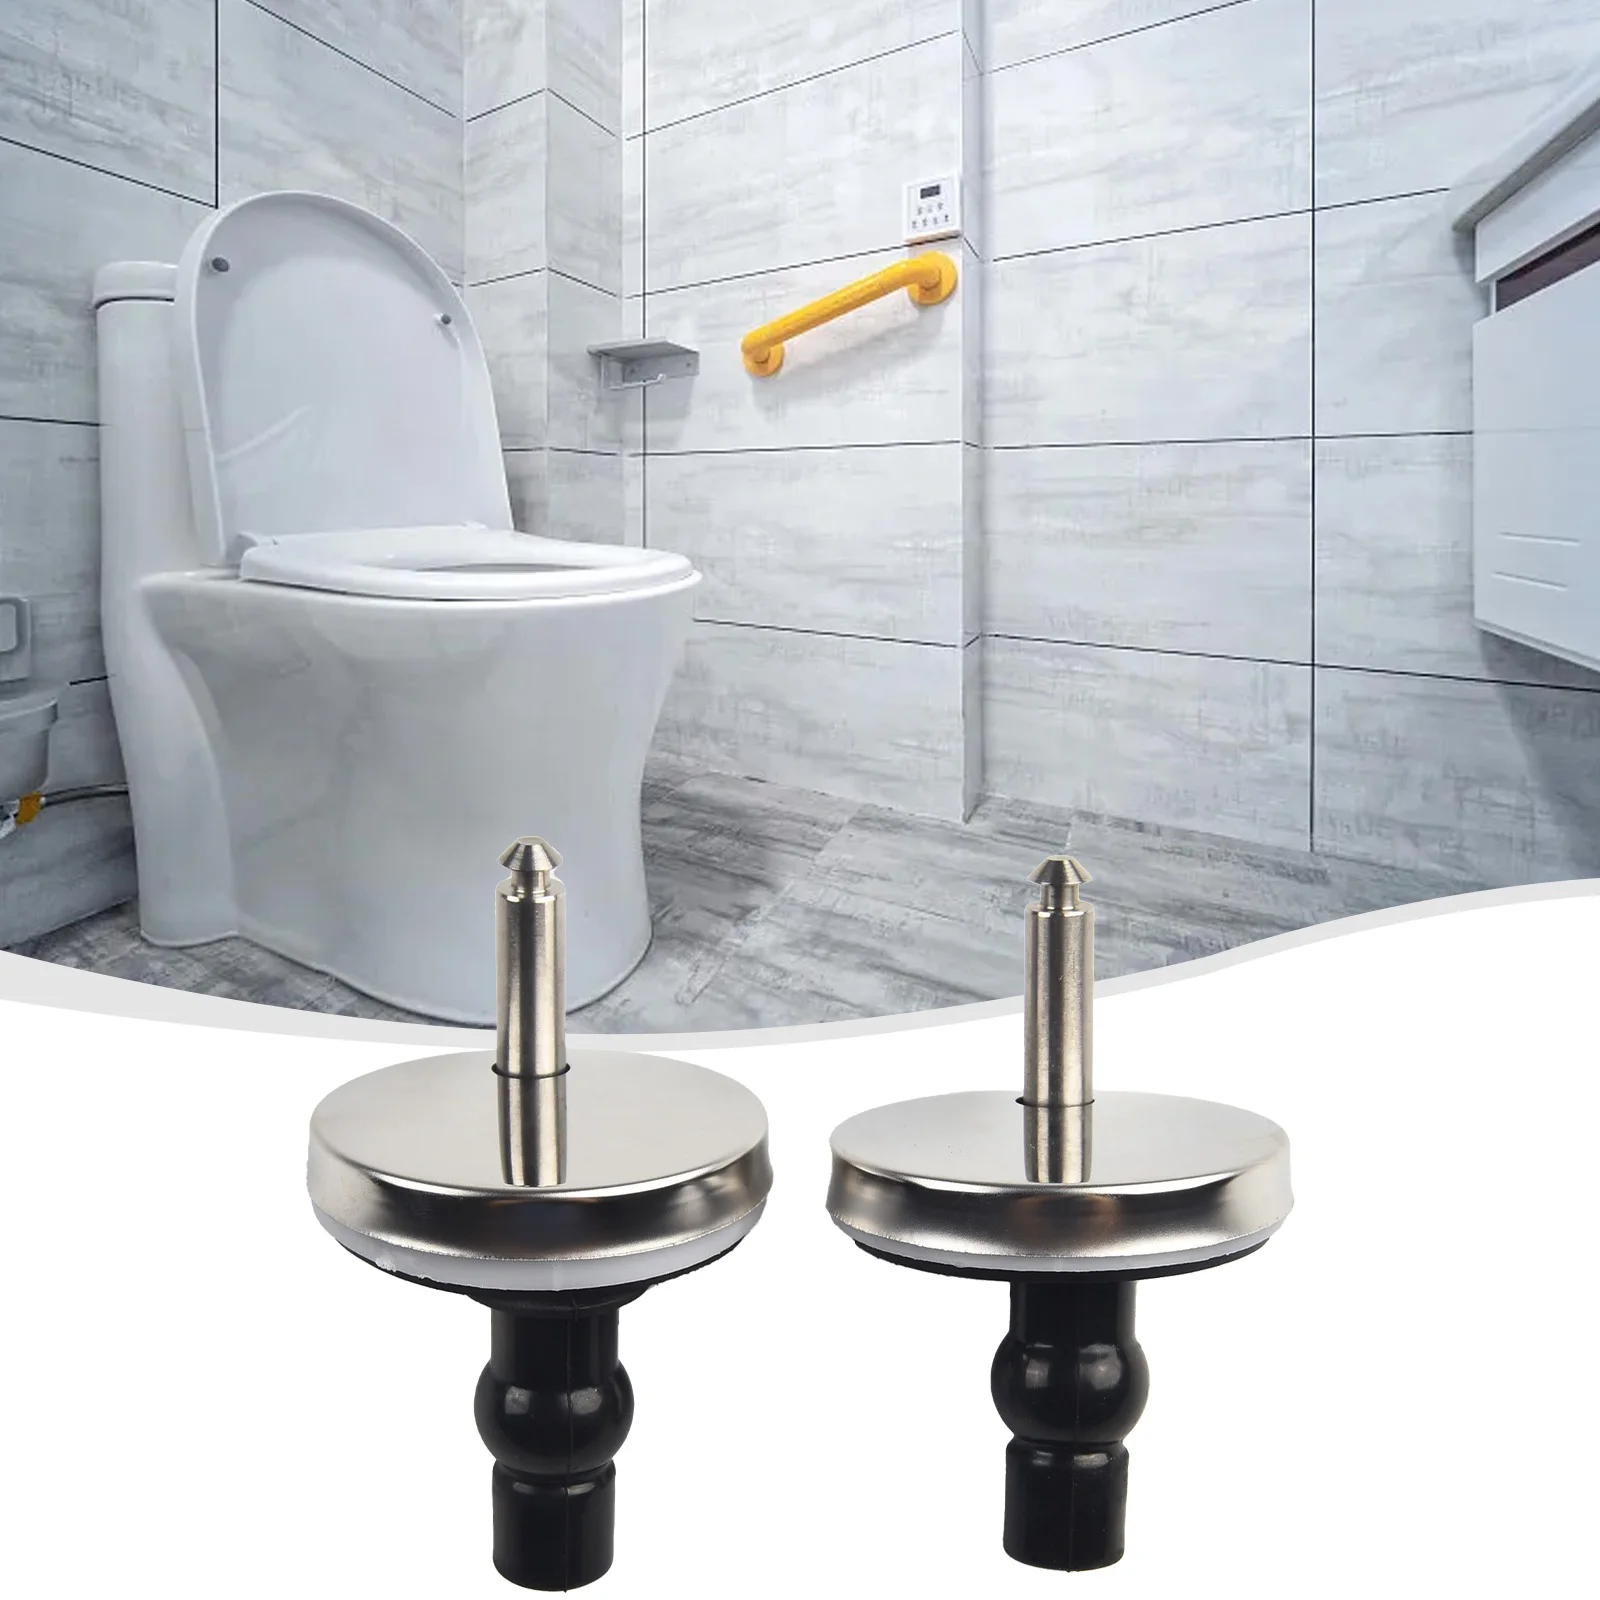 

Hinge Pack Toilet Hinge None Fitting Heavy Duty Stainless Steel Top Close 2pcs。 Toilet Hinges Hinge Pair Quick